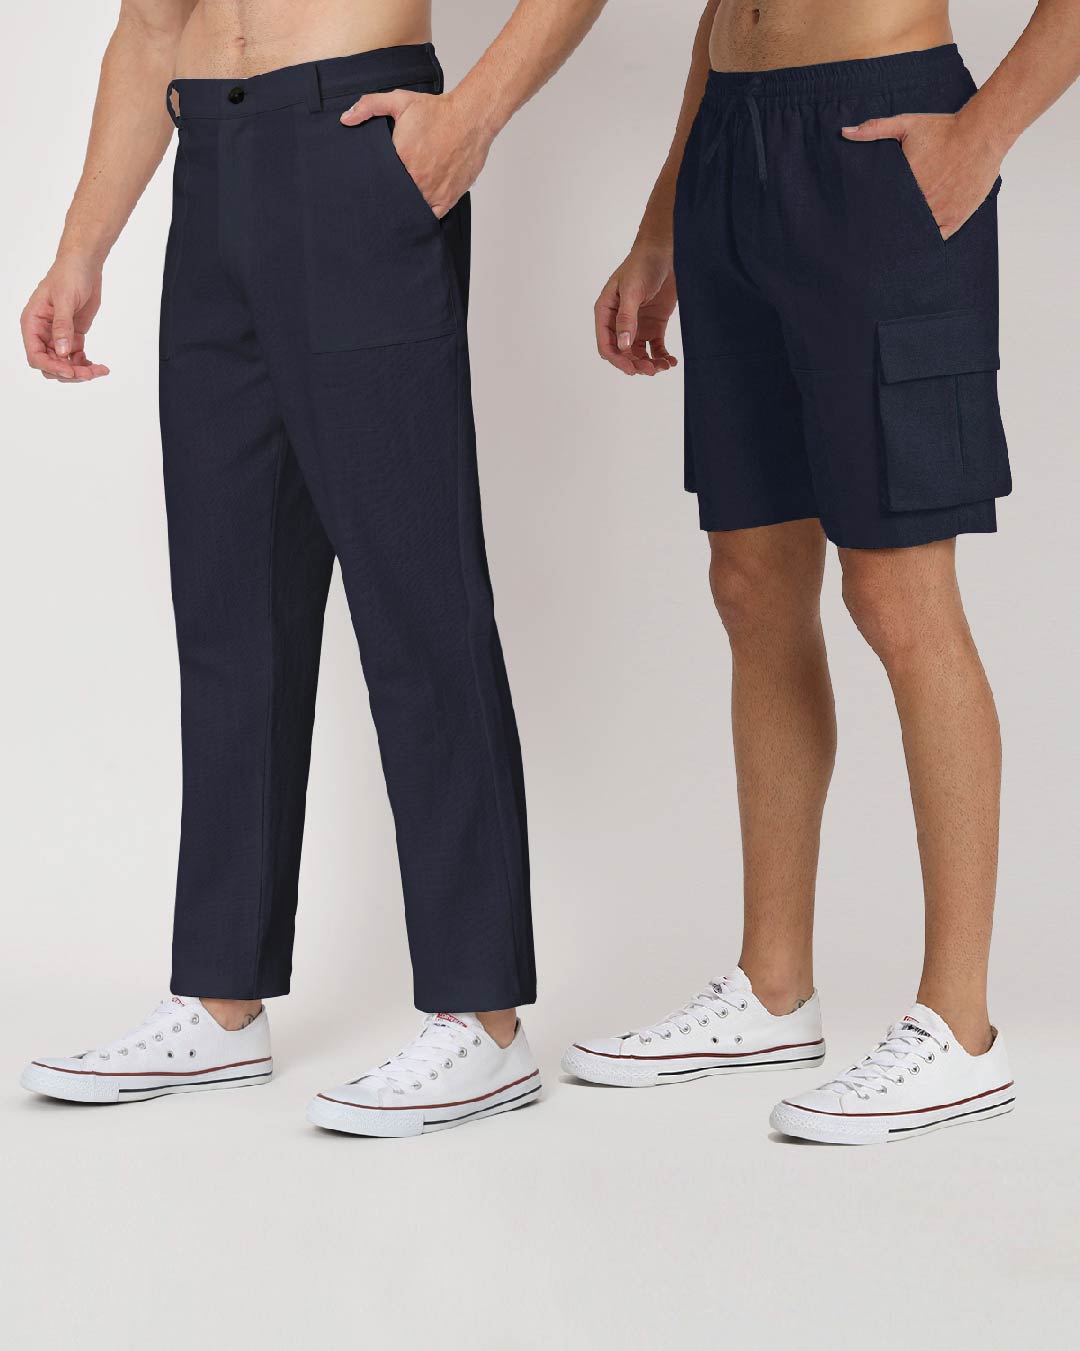 Combo : Comfy Ease & Cargo Midnight Blue Men's Pants & Shorts  - Set of 2